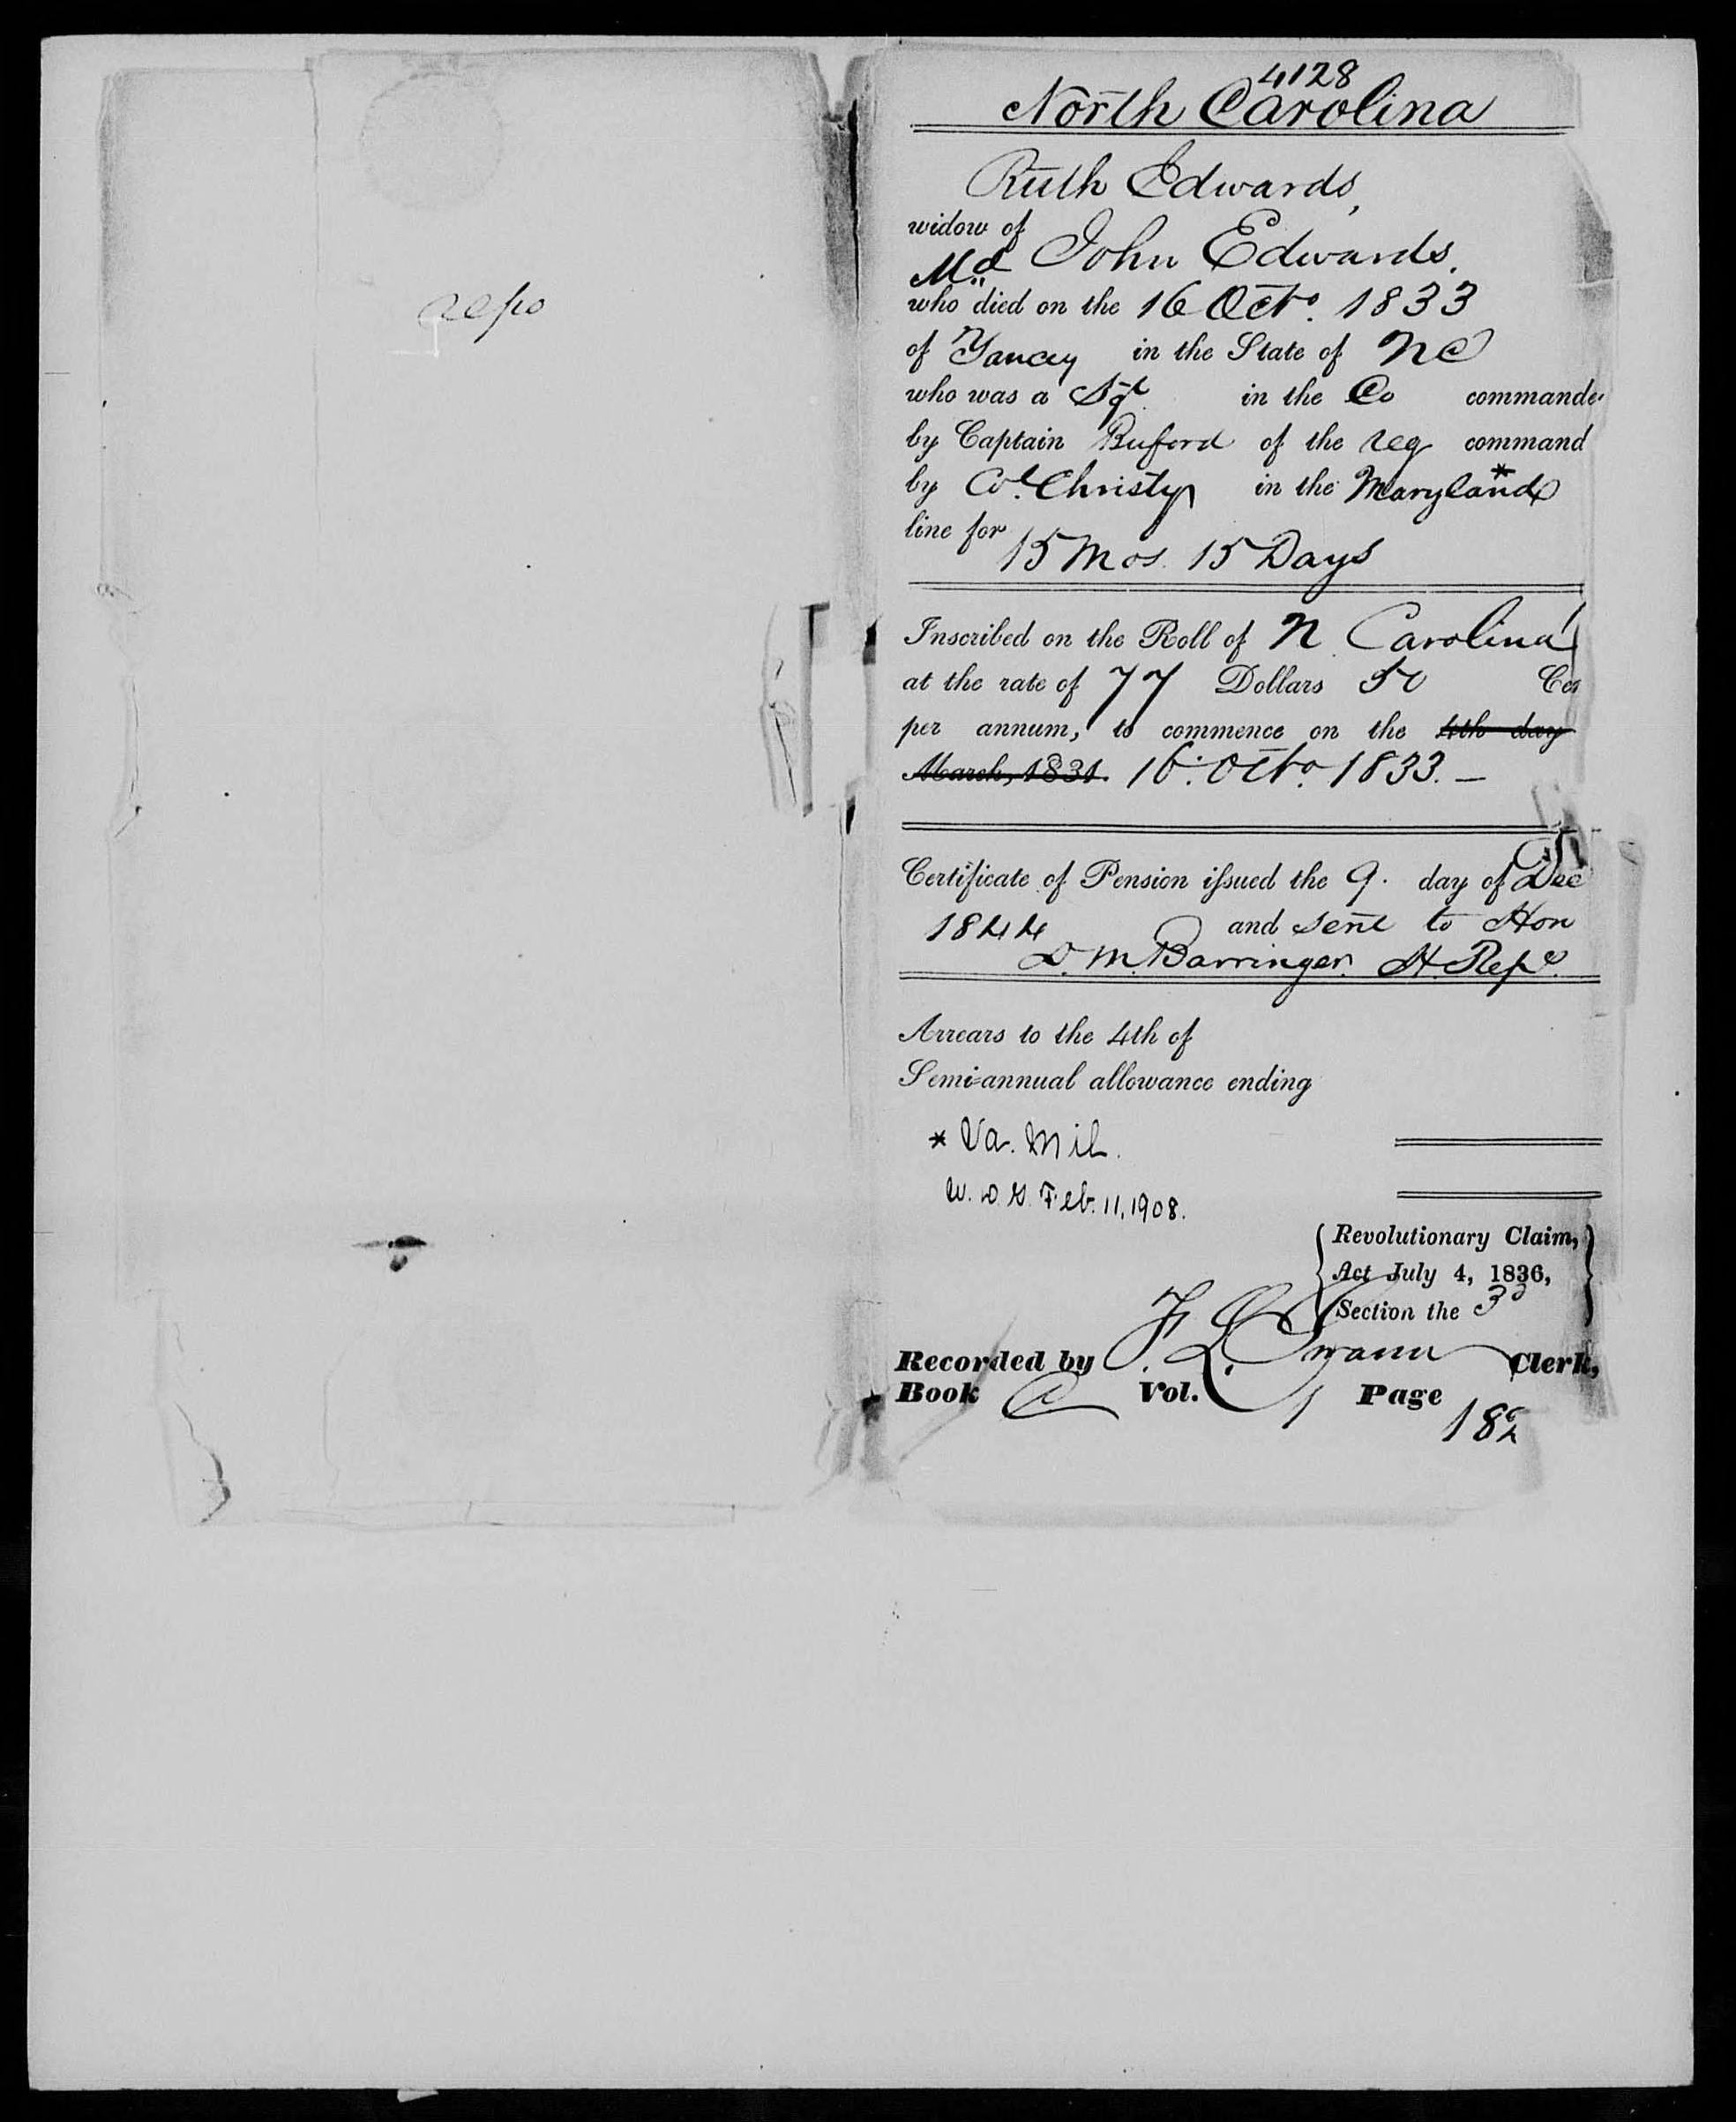 Docket for Widow's Pension from the U.S. Pension Office for Ruth Edwards, 9 December 1844